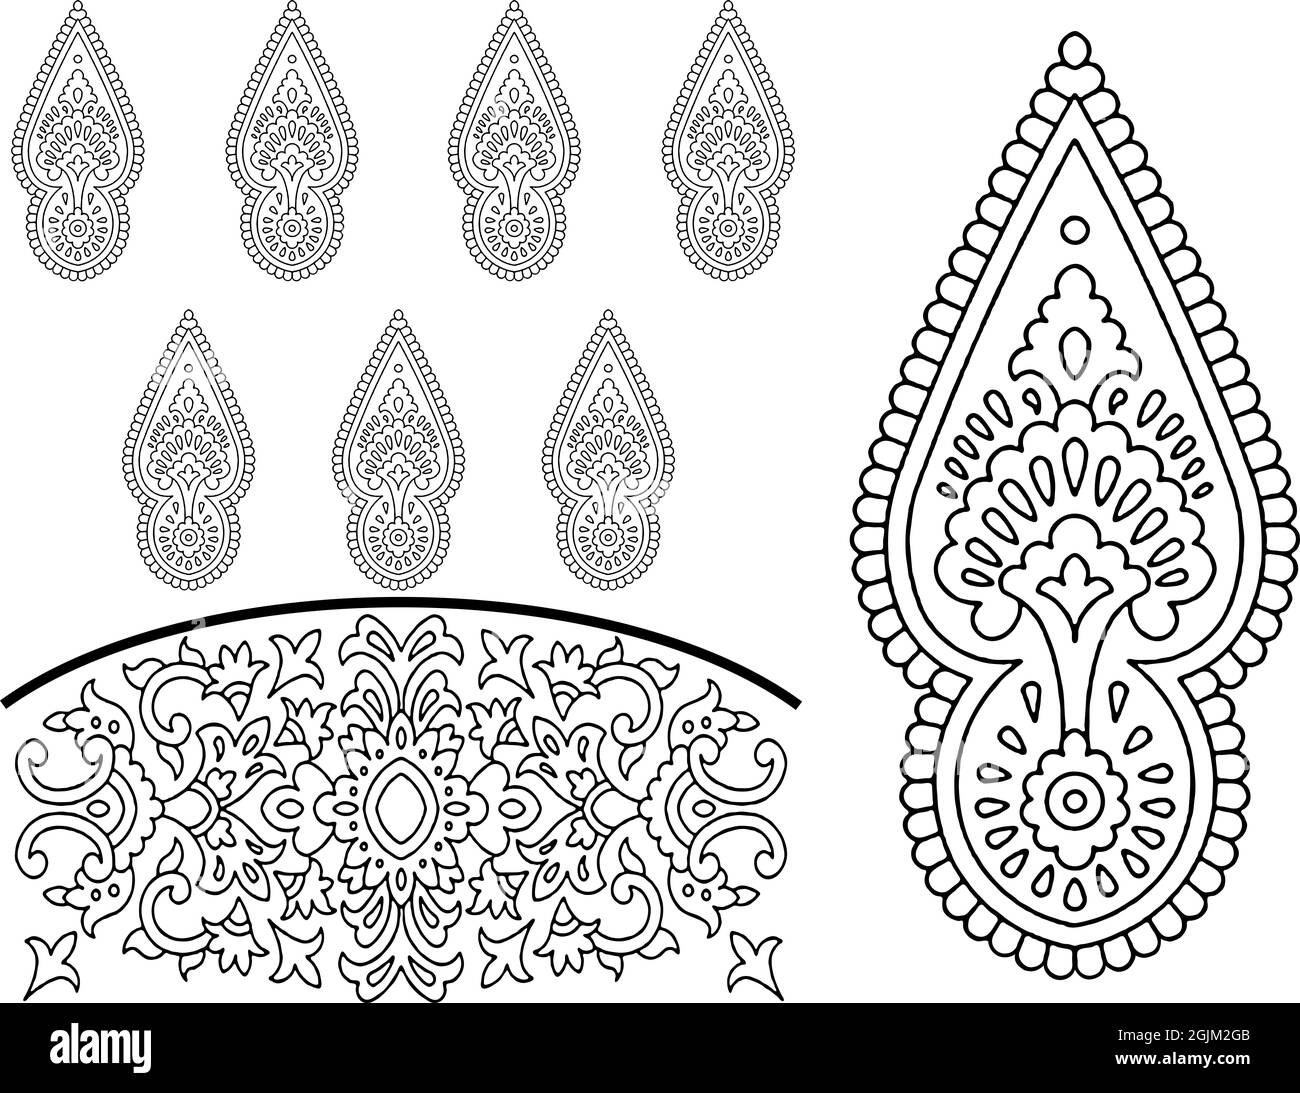 Geometrical Aztec Pattern design in black and white color with calligraphic seamless border Stock Photo